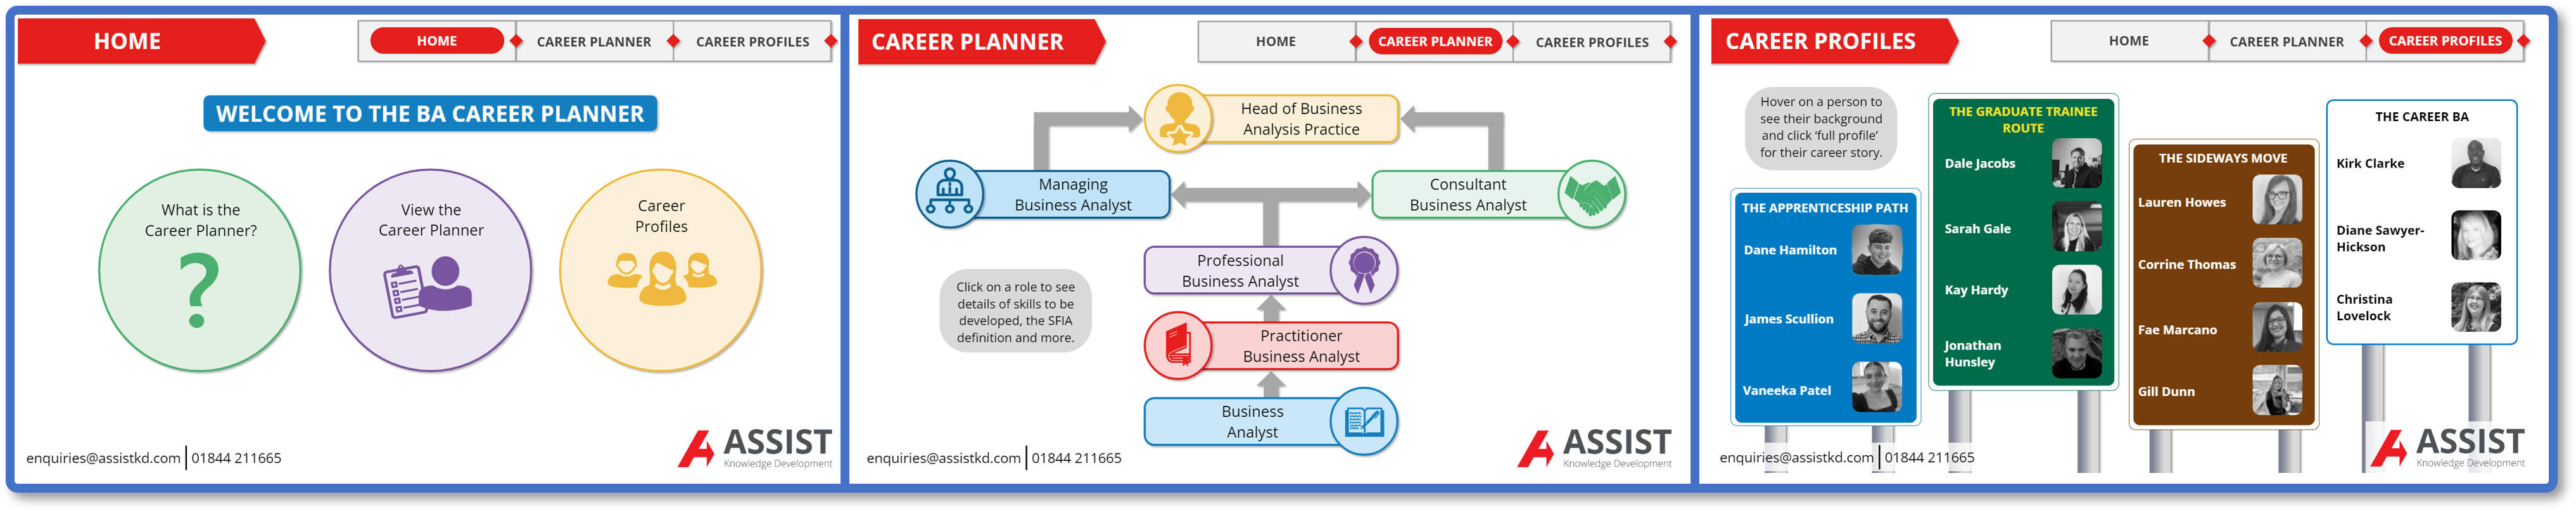 The Career Planning Tool